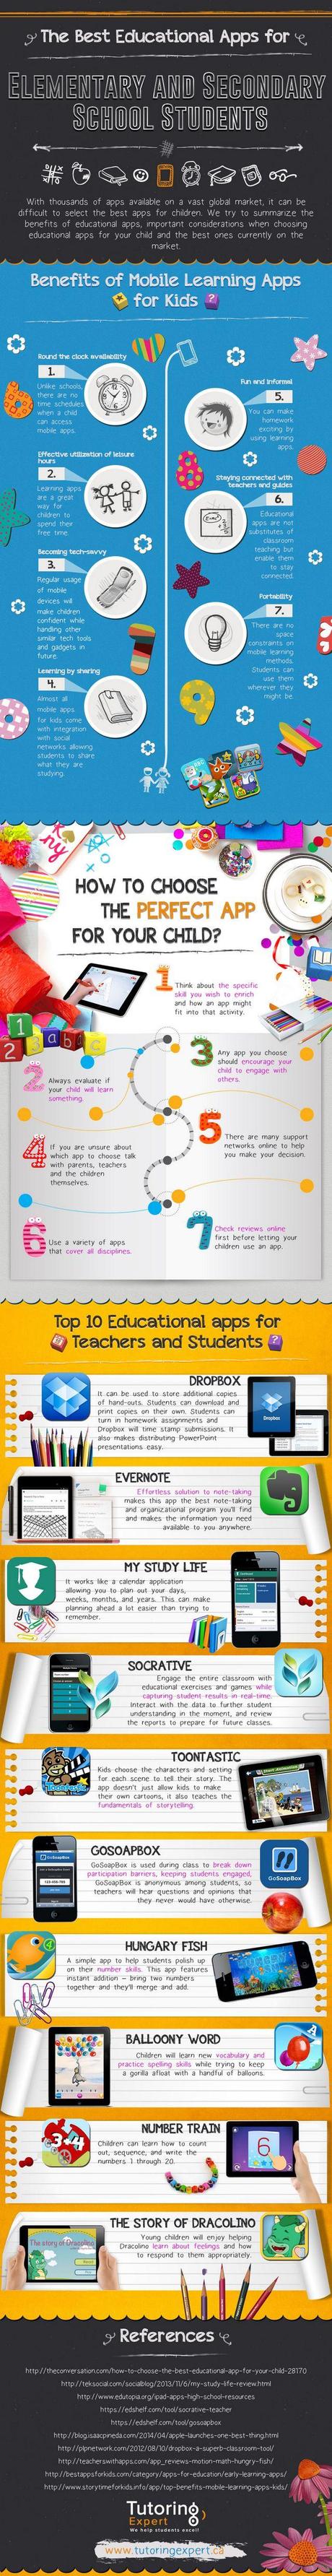 educative-apps-kids- infographic